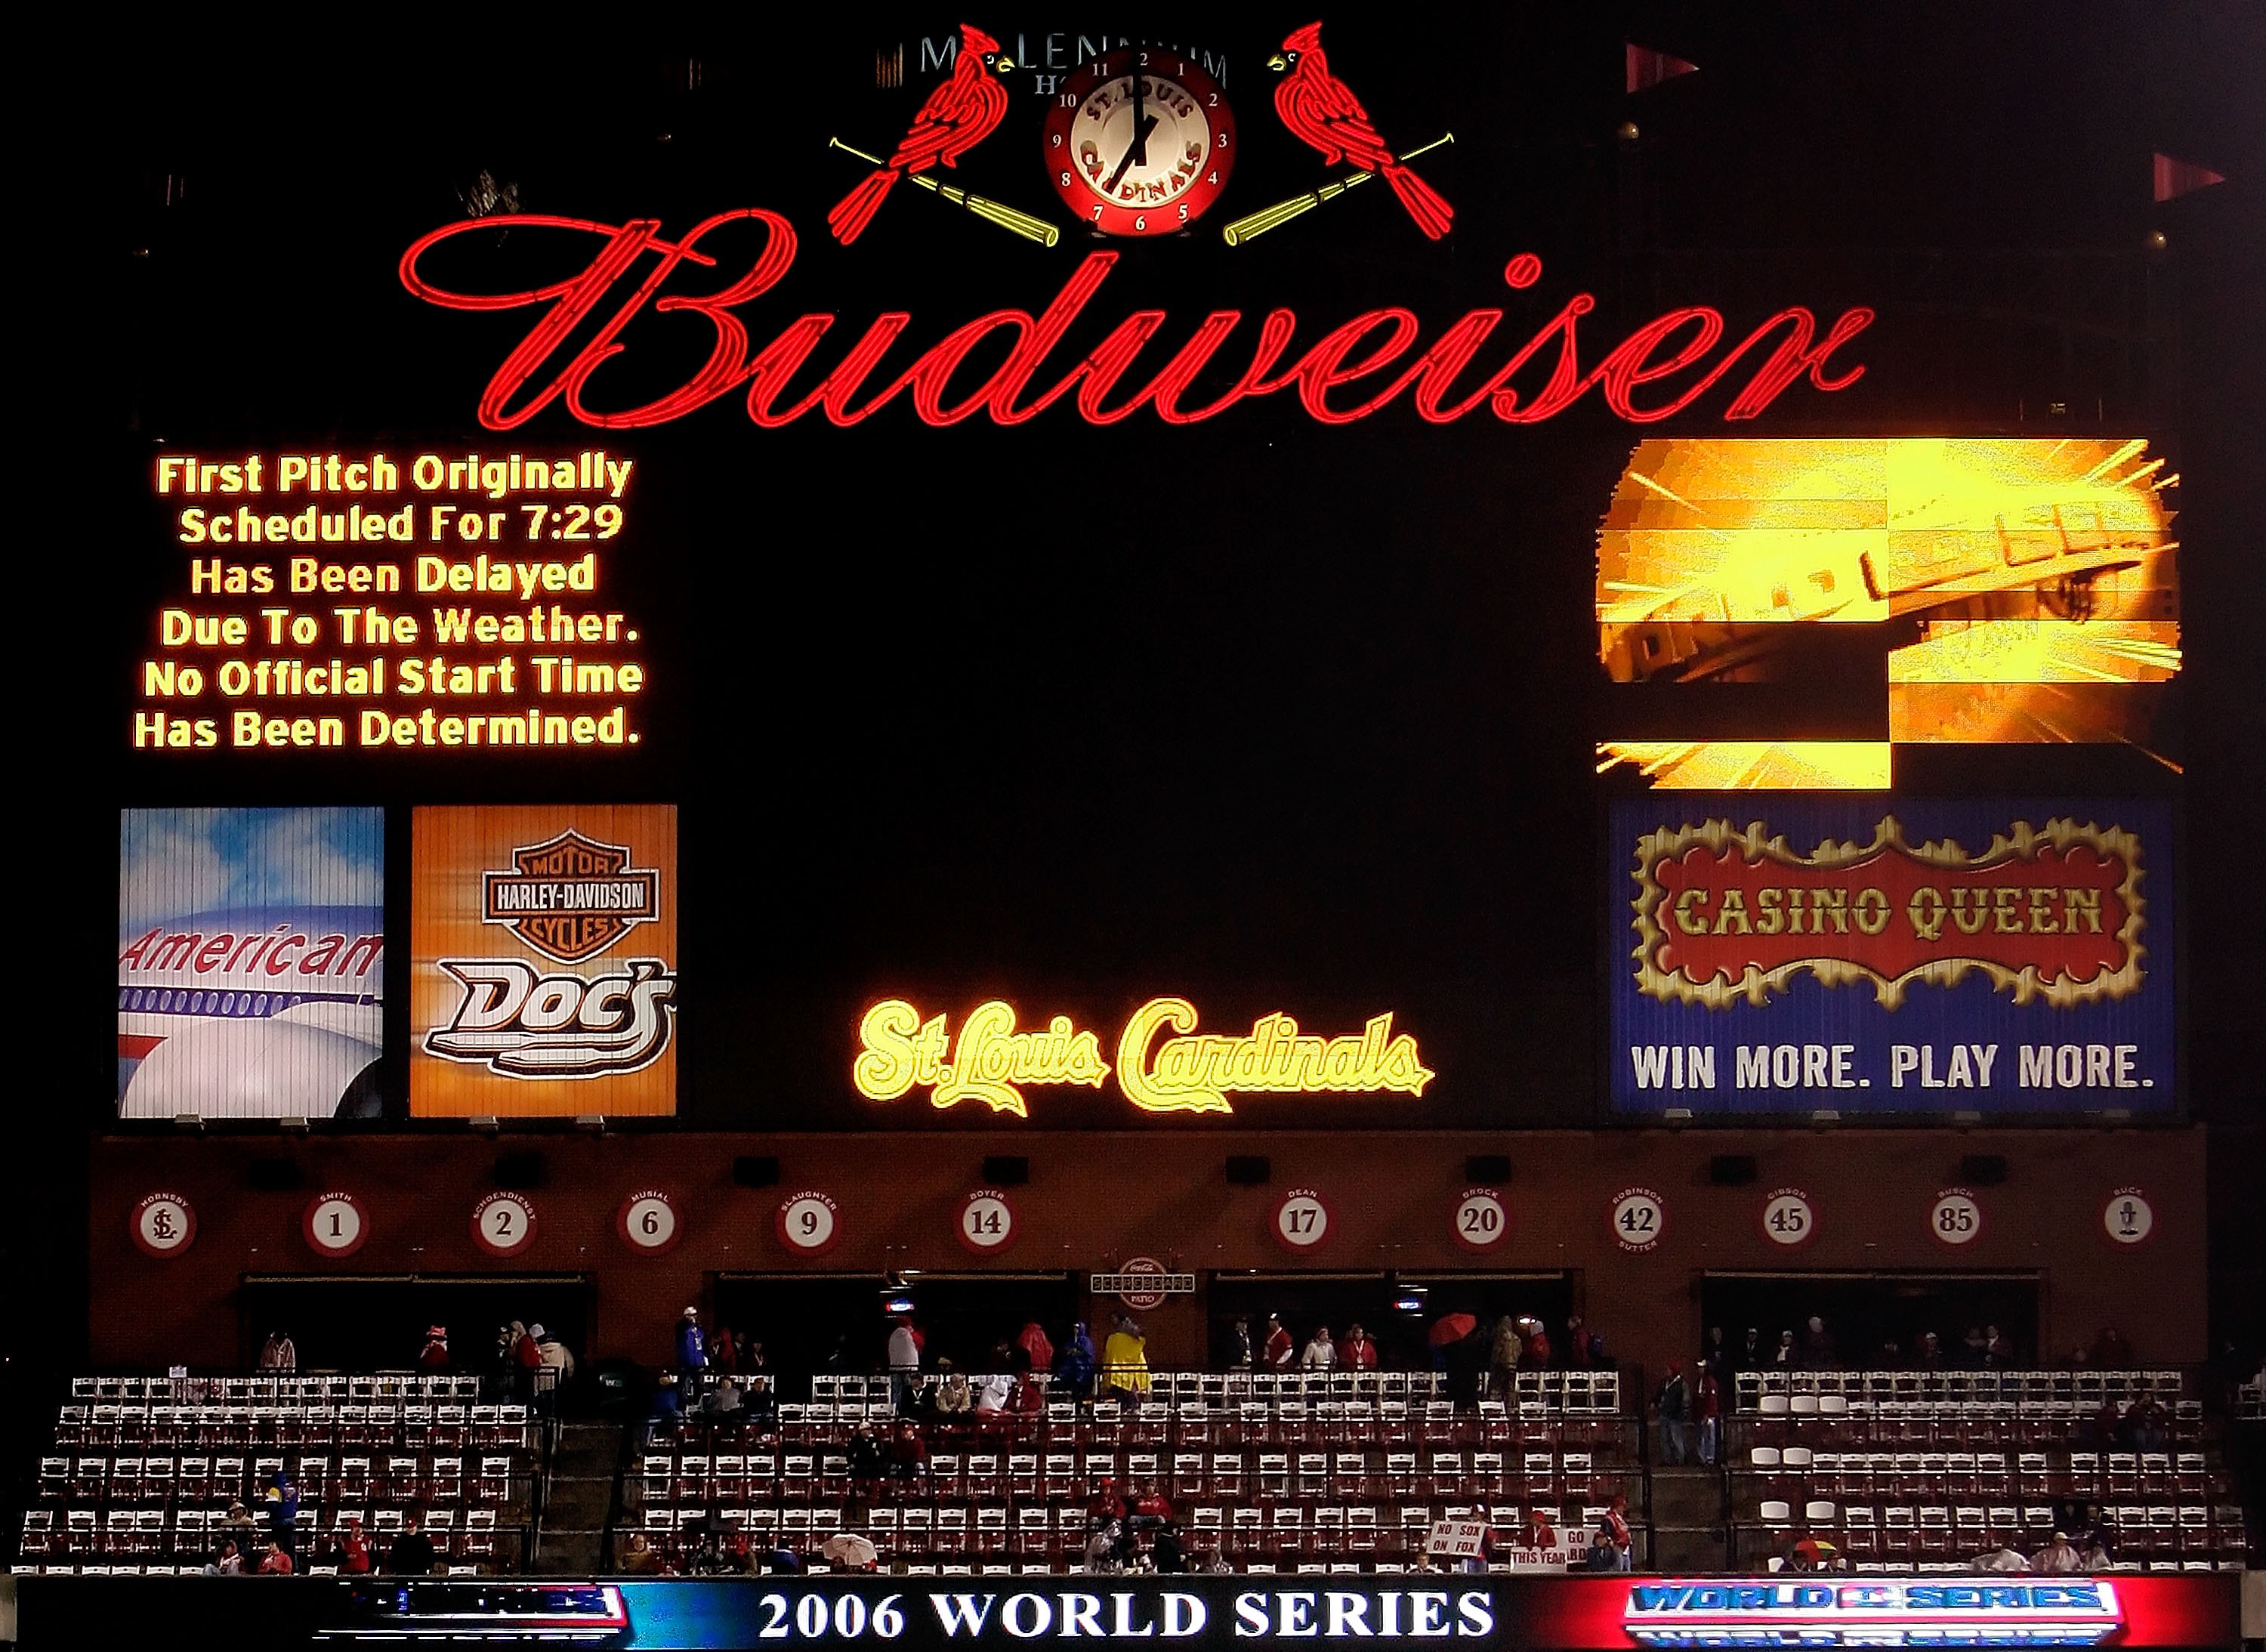 ST LOUIS - OCTOBER 25:  The Billboard announcing the delay of Game Four of the 2006 World Series between the Detroit Tigers and the St. Louis Cardinals is seen at Busch Stadium on October 25, 2006 in St. Louis, Missouri.  (Photo by Jed Jacobsohn/Getty Ima